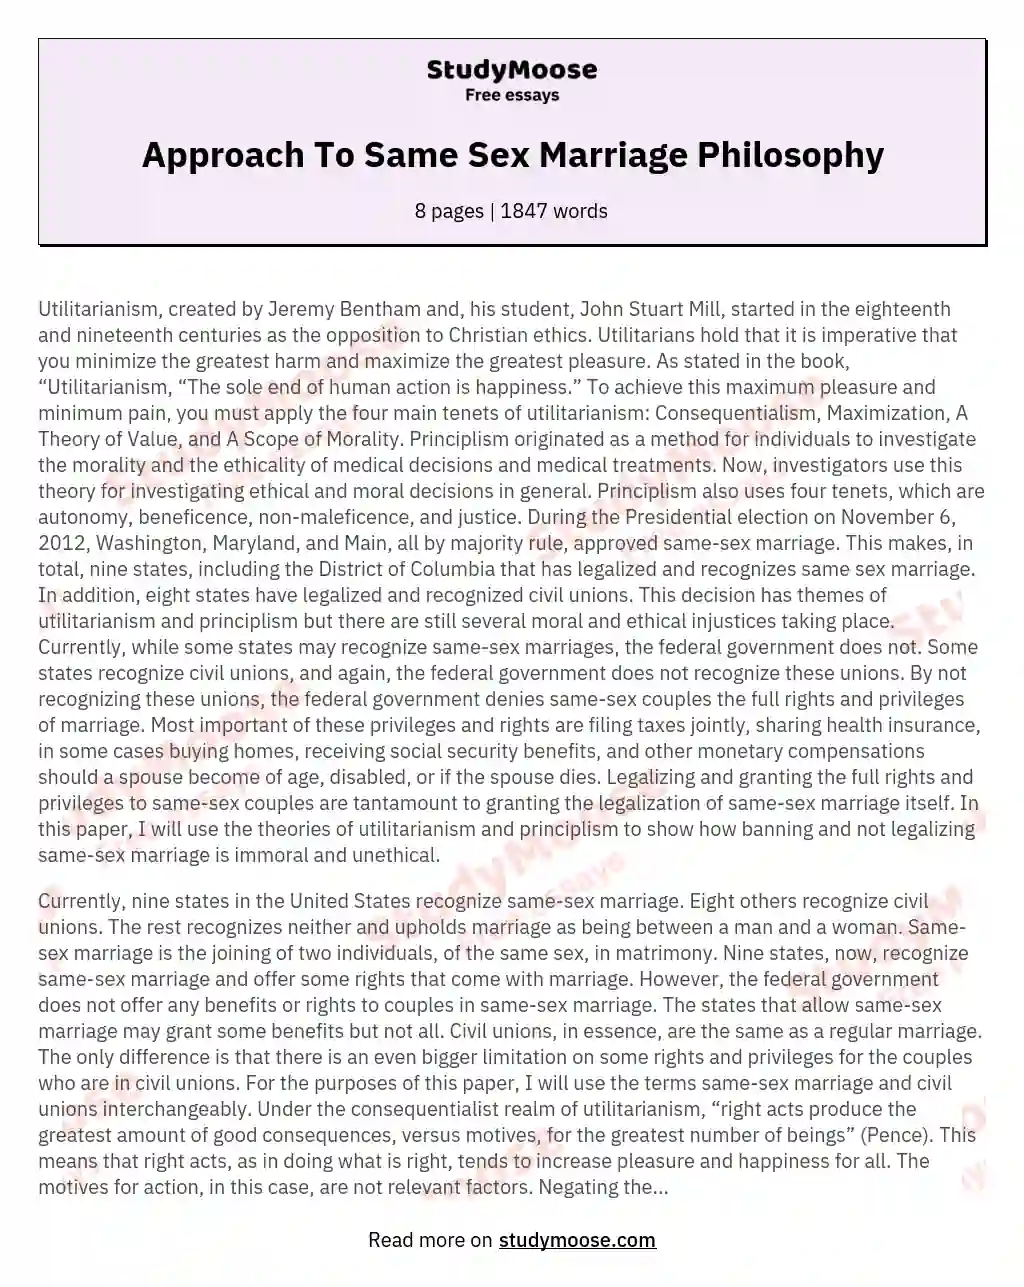 Approach To Same Sex Marriage Philosophy